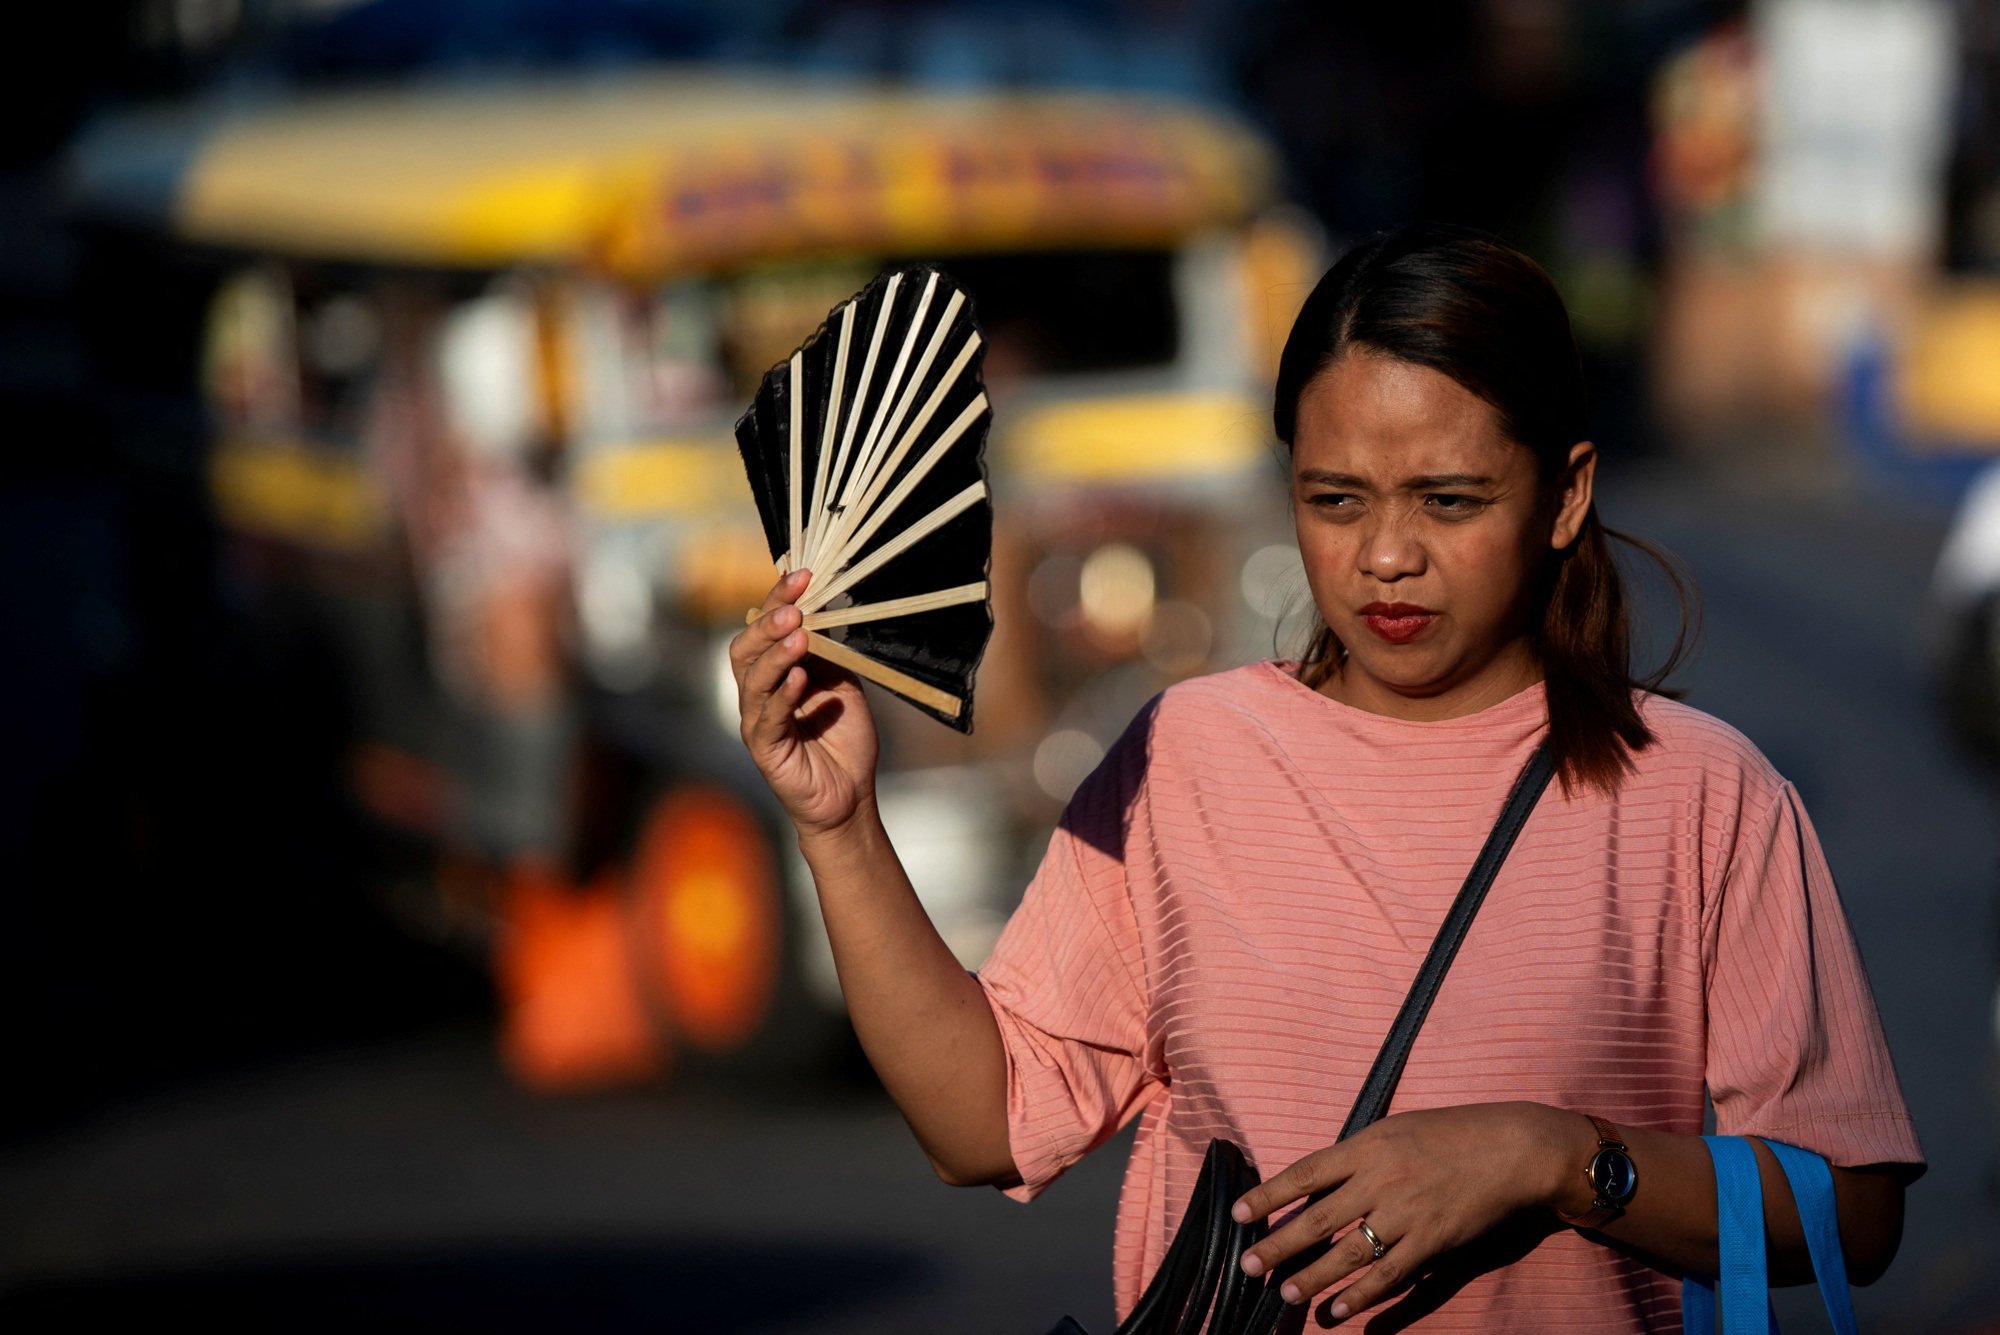 A woman uses a hand fan to cool herself during a hot day in Manila last week. Sweltering temperatures in the Philippine capital have forced many schools to switch to remote learning. Photo: Reuters